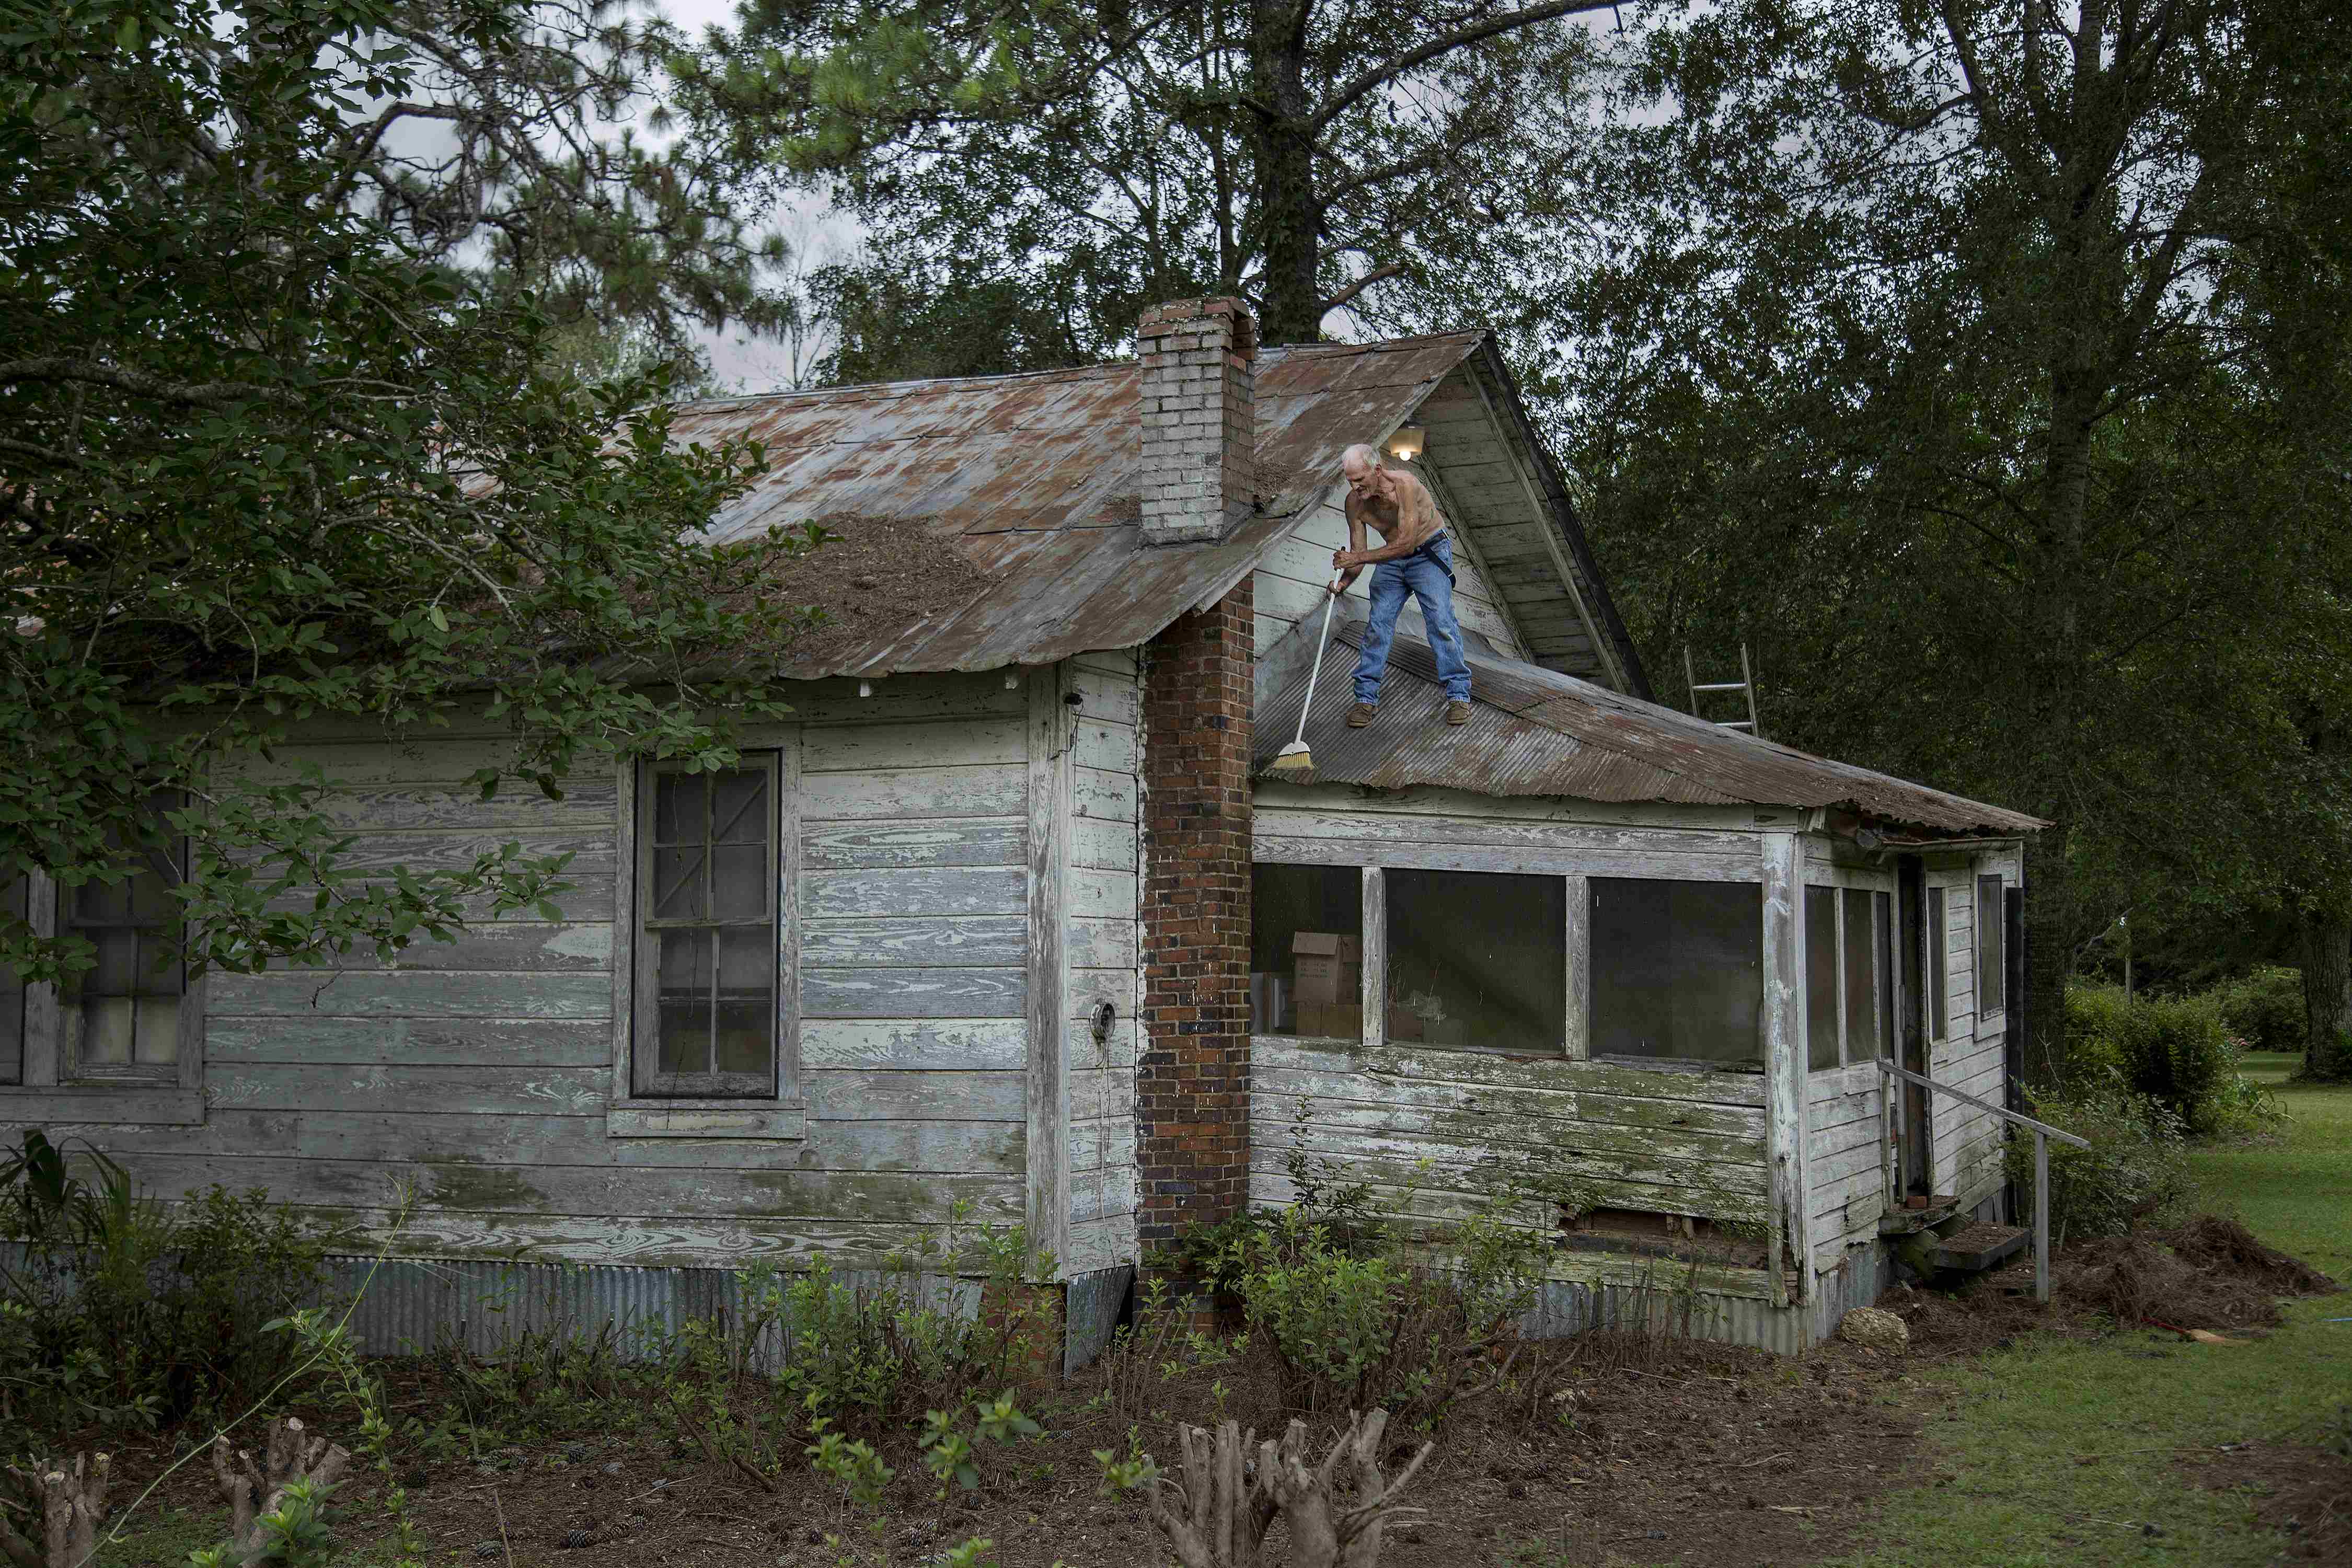 Elderly man standing on roof, sweeping off foliage.